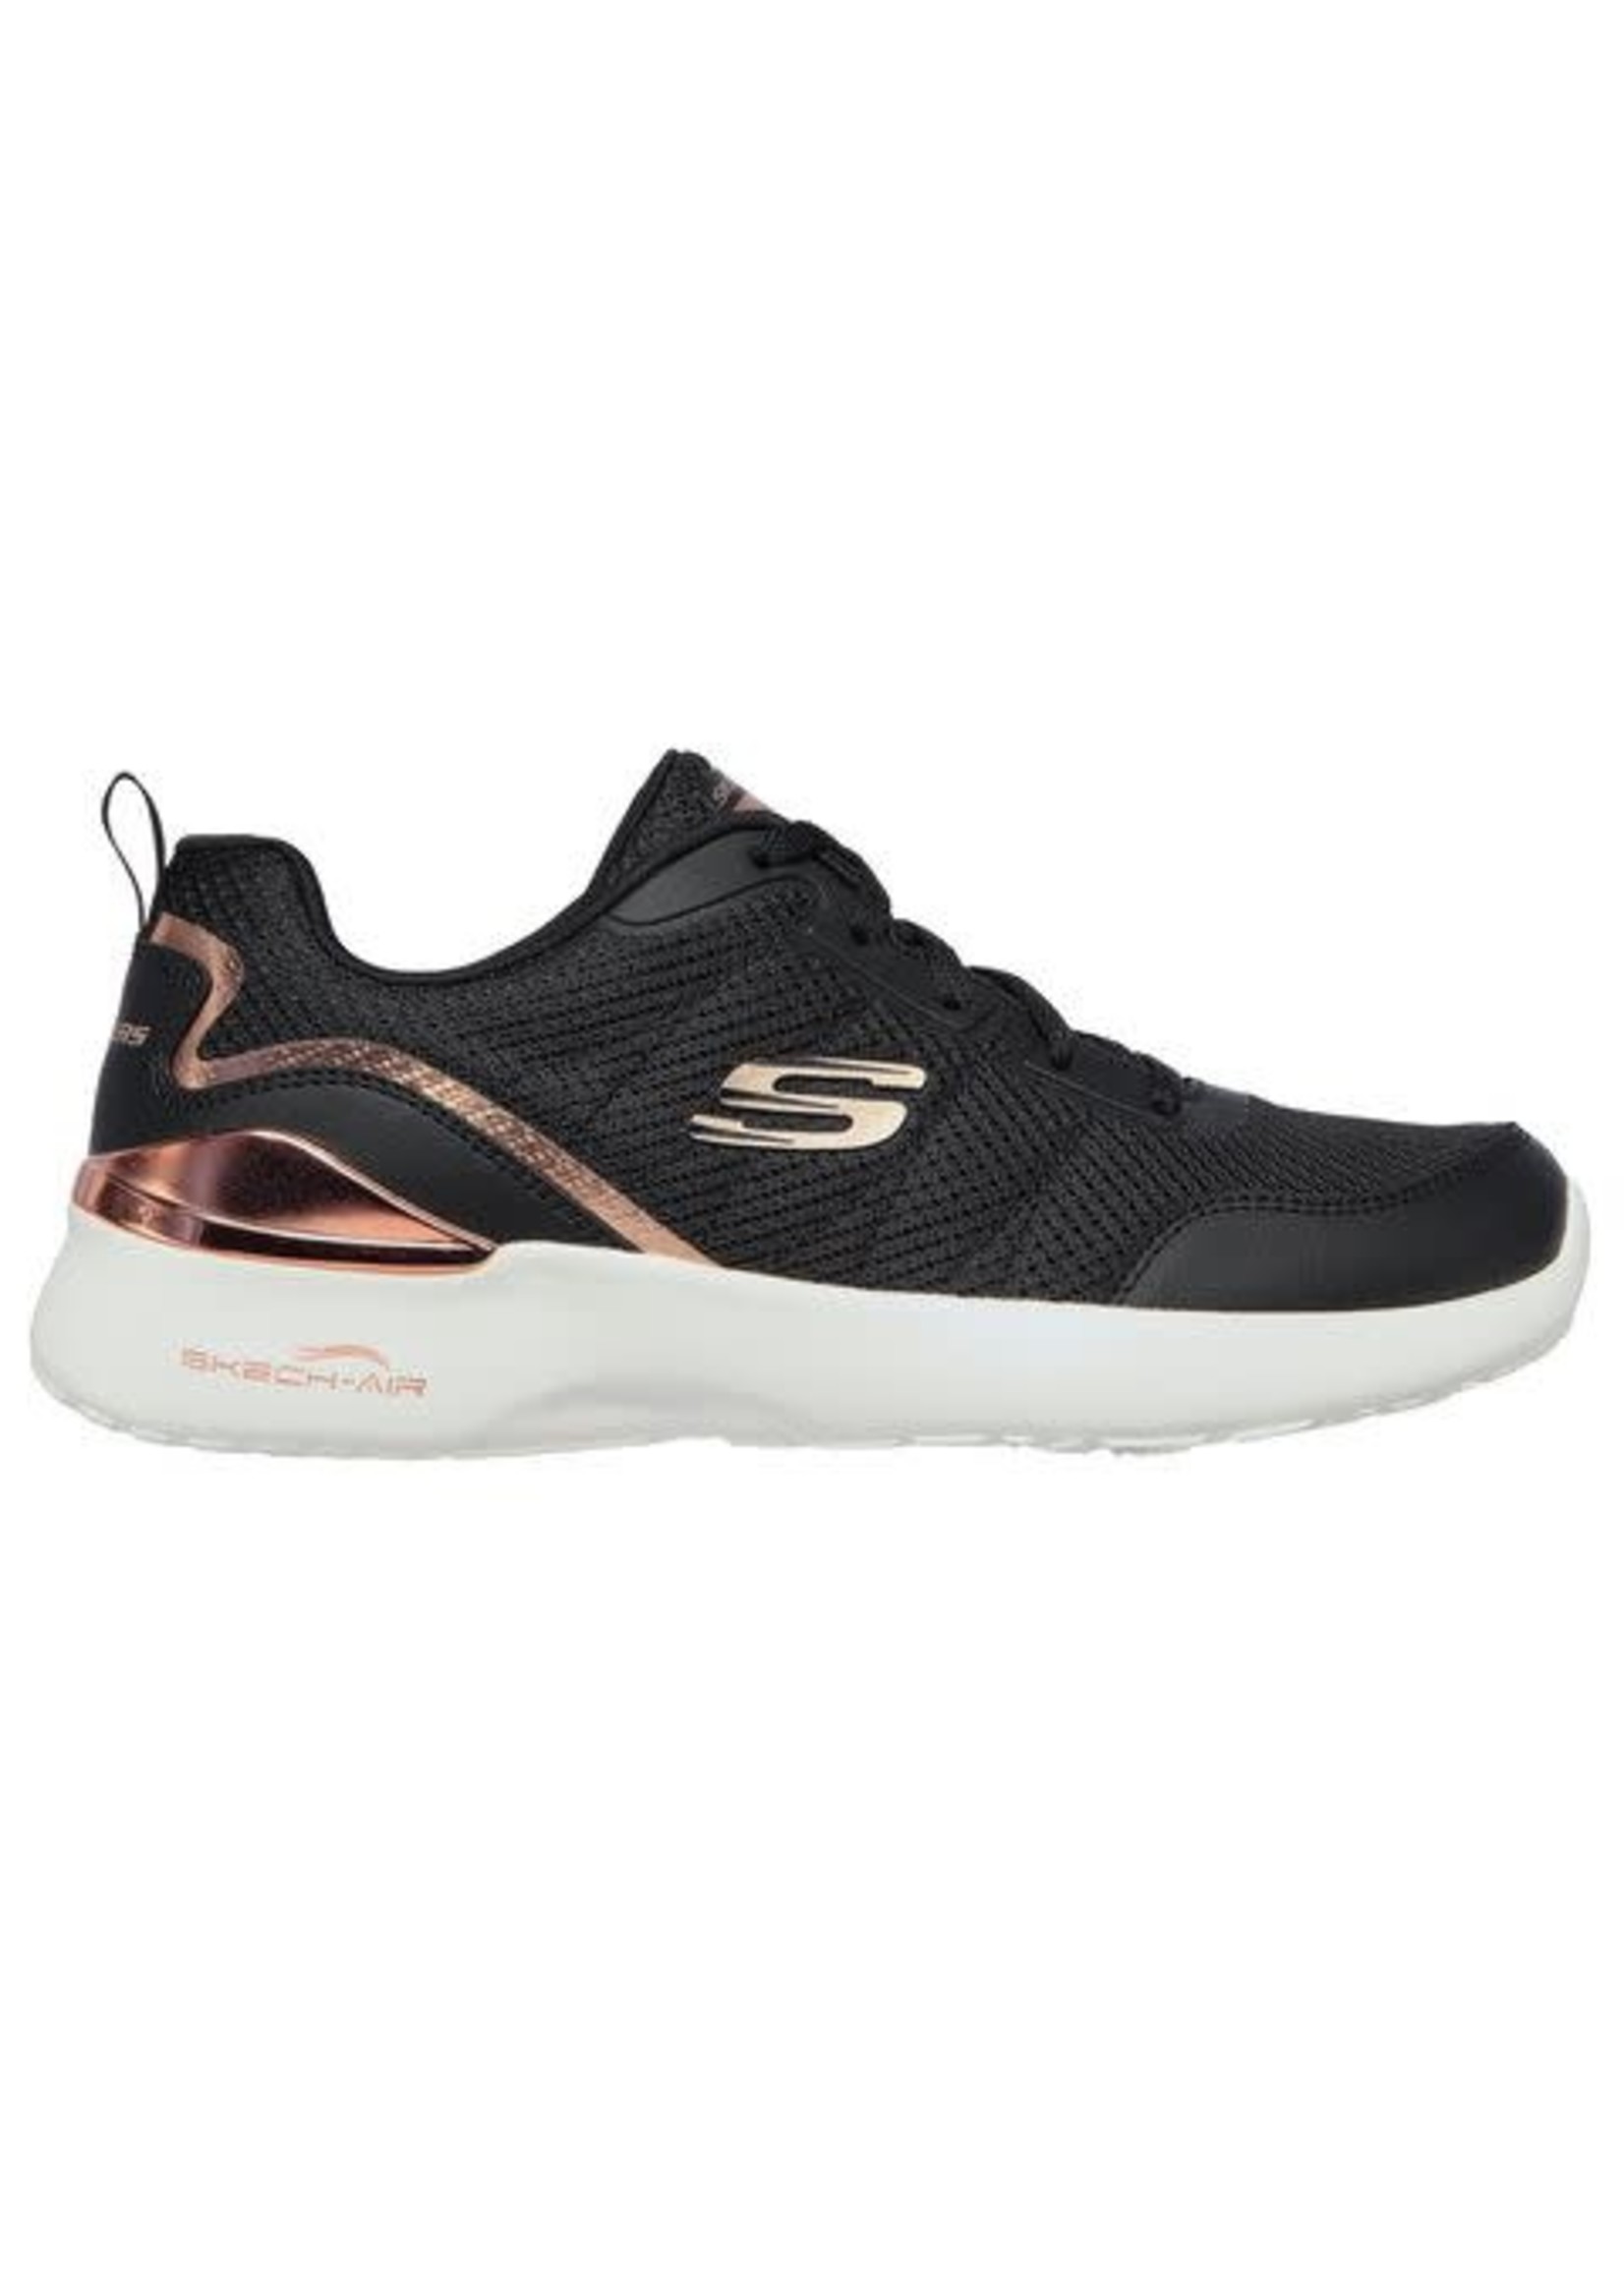 Skechers Womens Sketch-Air Dynamight The Halcyon 149660 Black Rose Gold ...